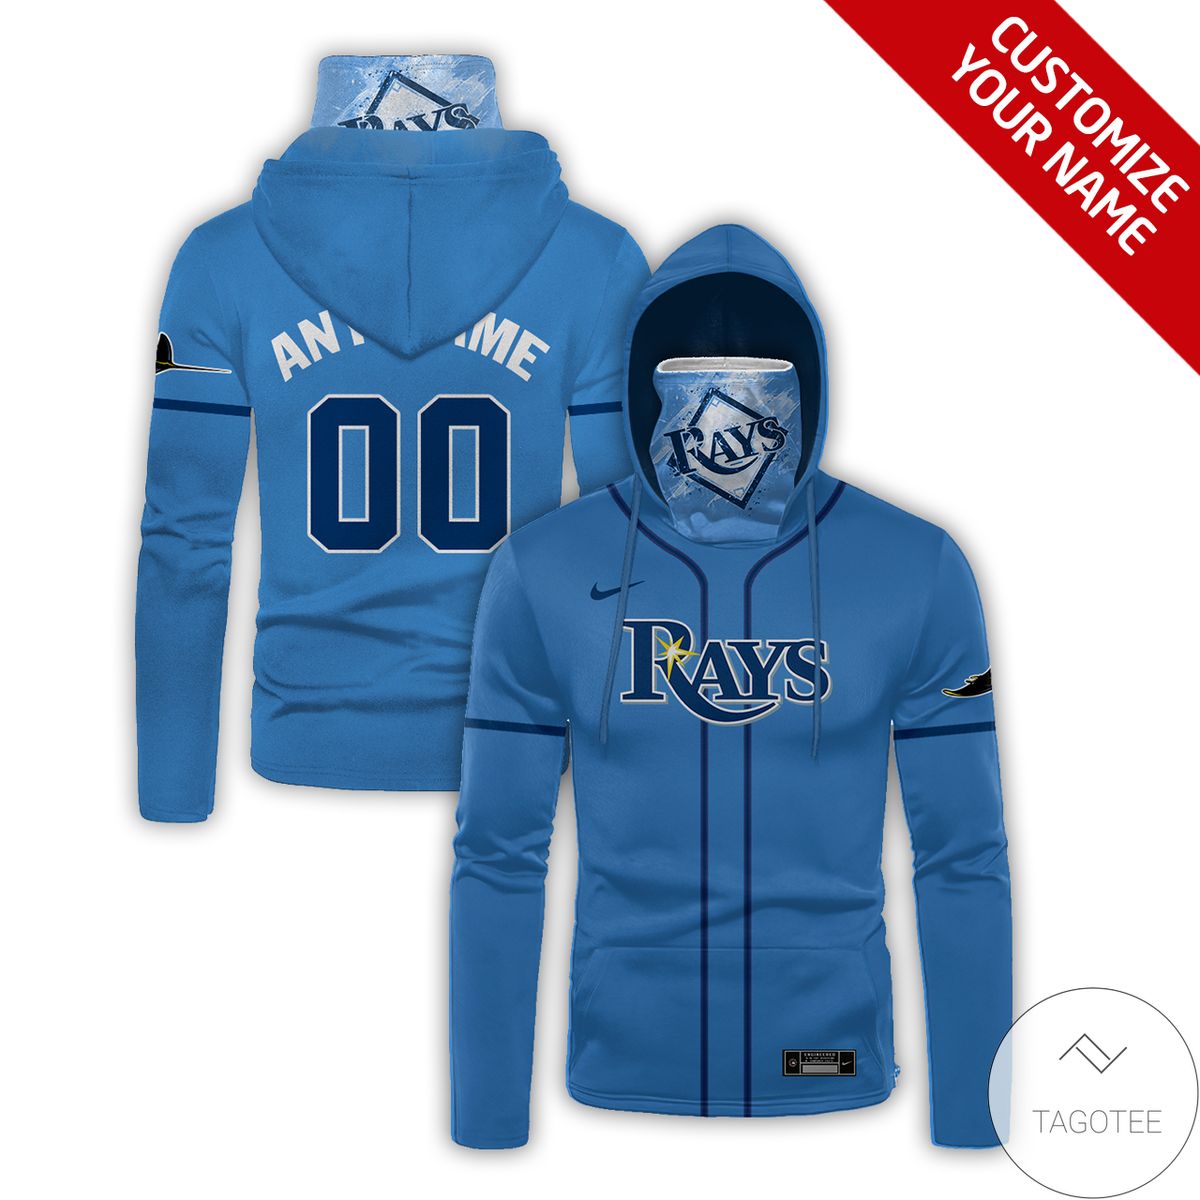 Personalized Name And Number Tampa Bay Rays Gaiter Mask Hoodie